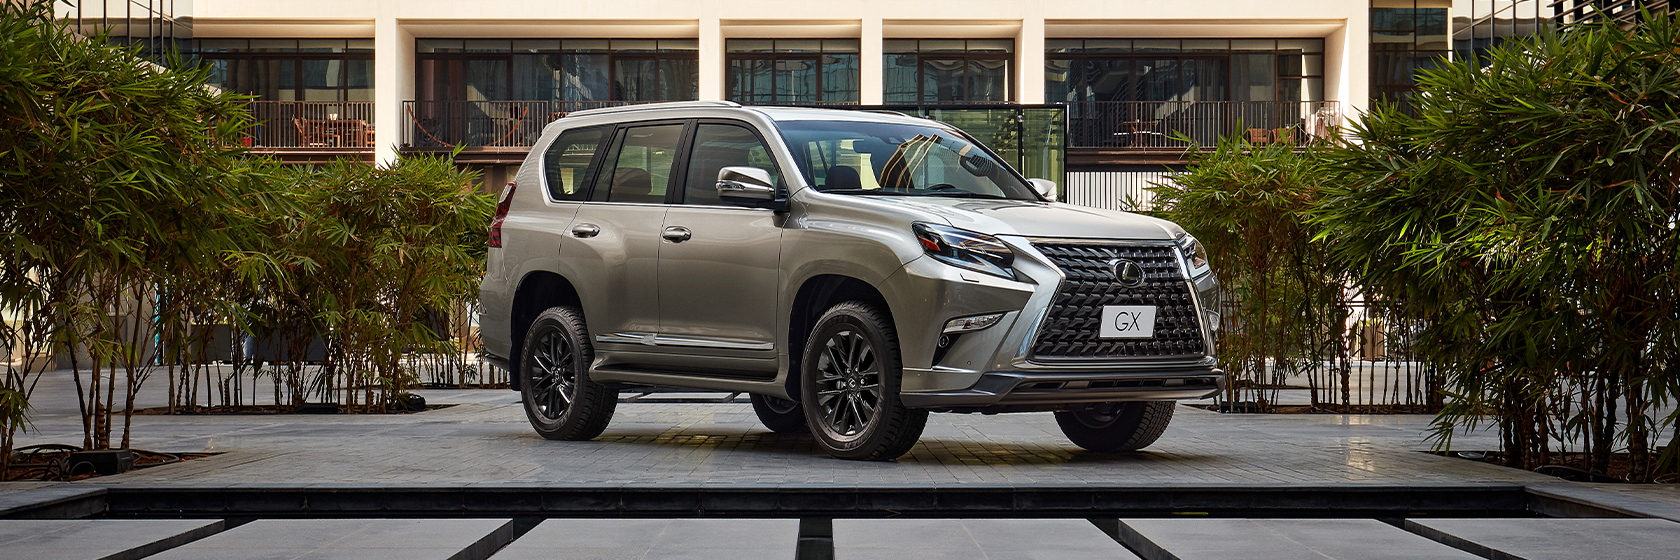 the-best-pre-owned-lexus-suv-to-buy